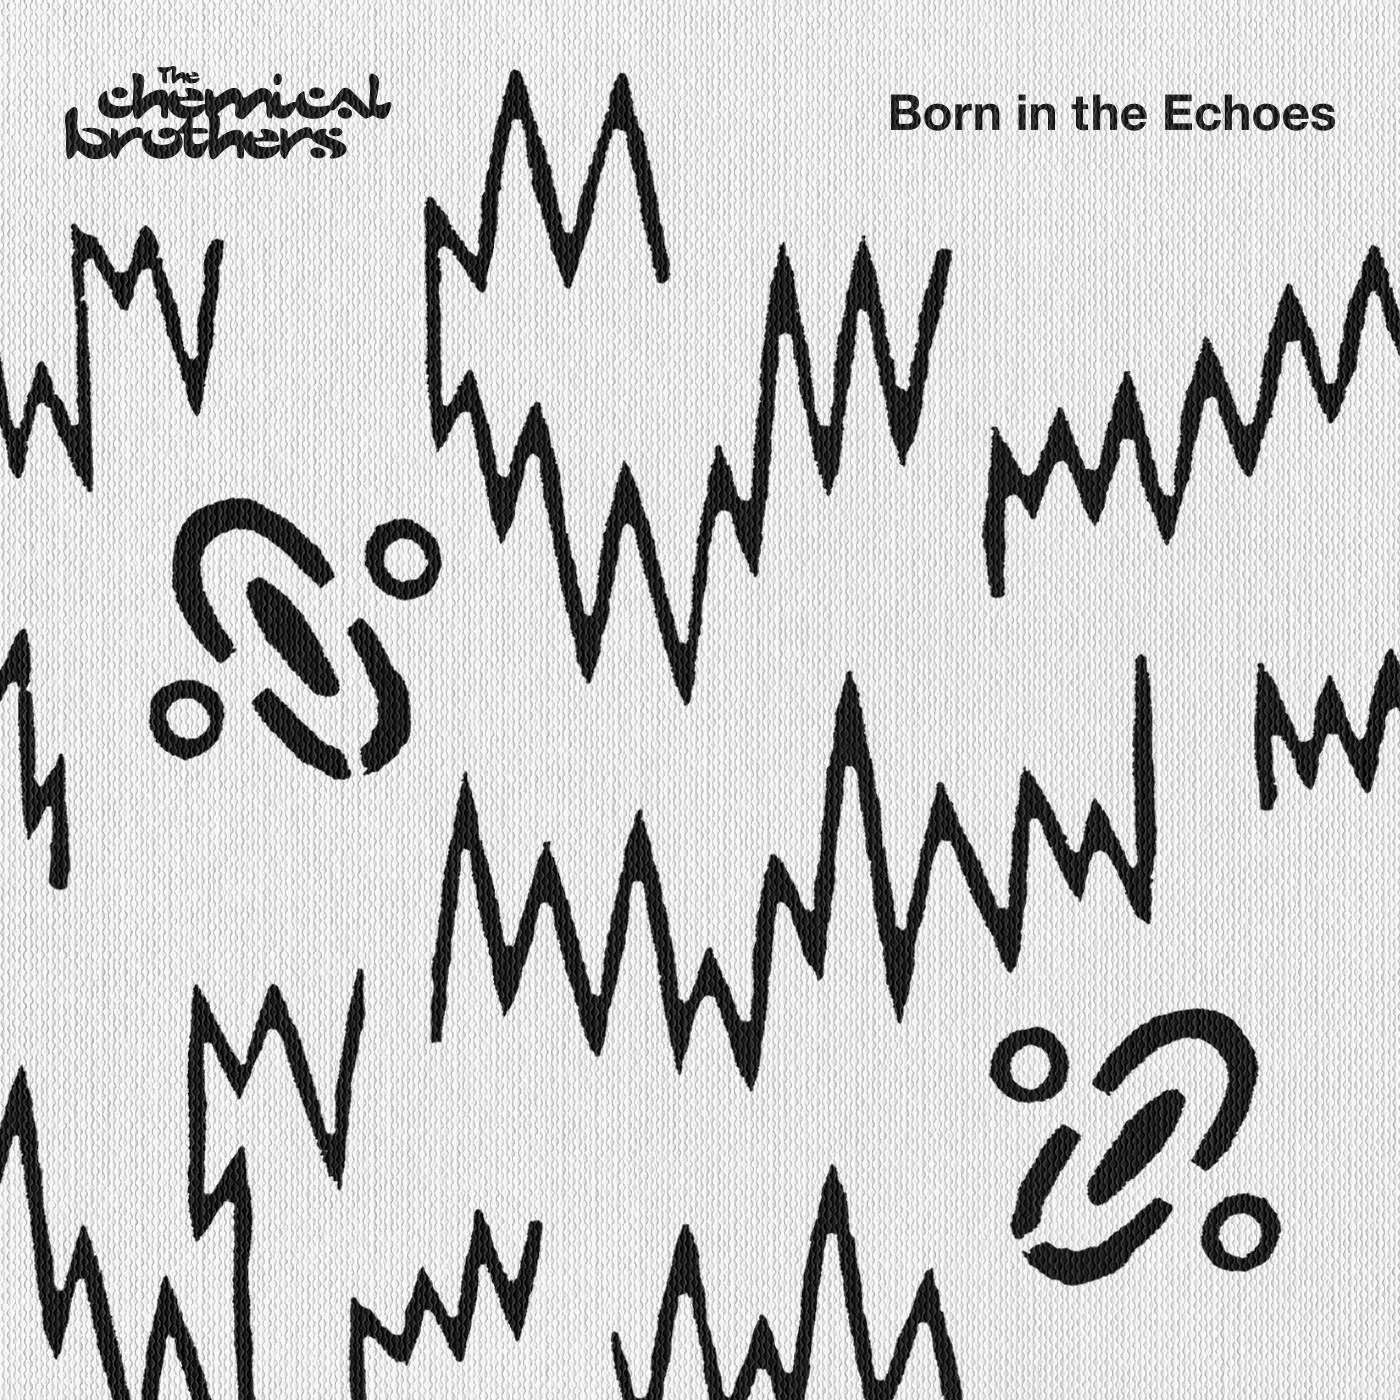 Imagem do álbum Born In The Echoes do(a) artista The Chemical Brothers